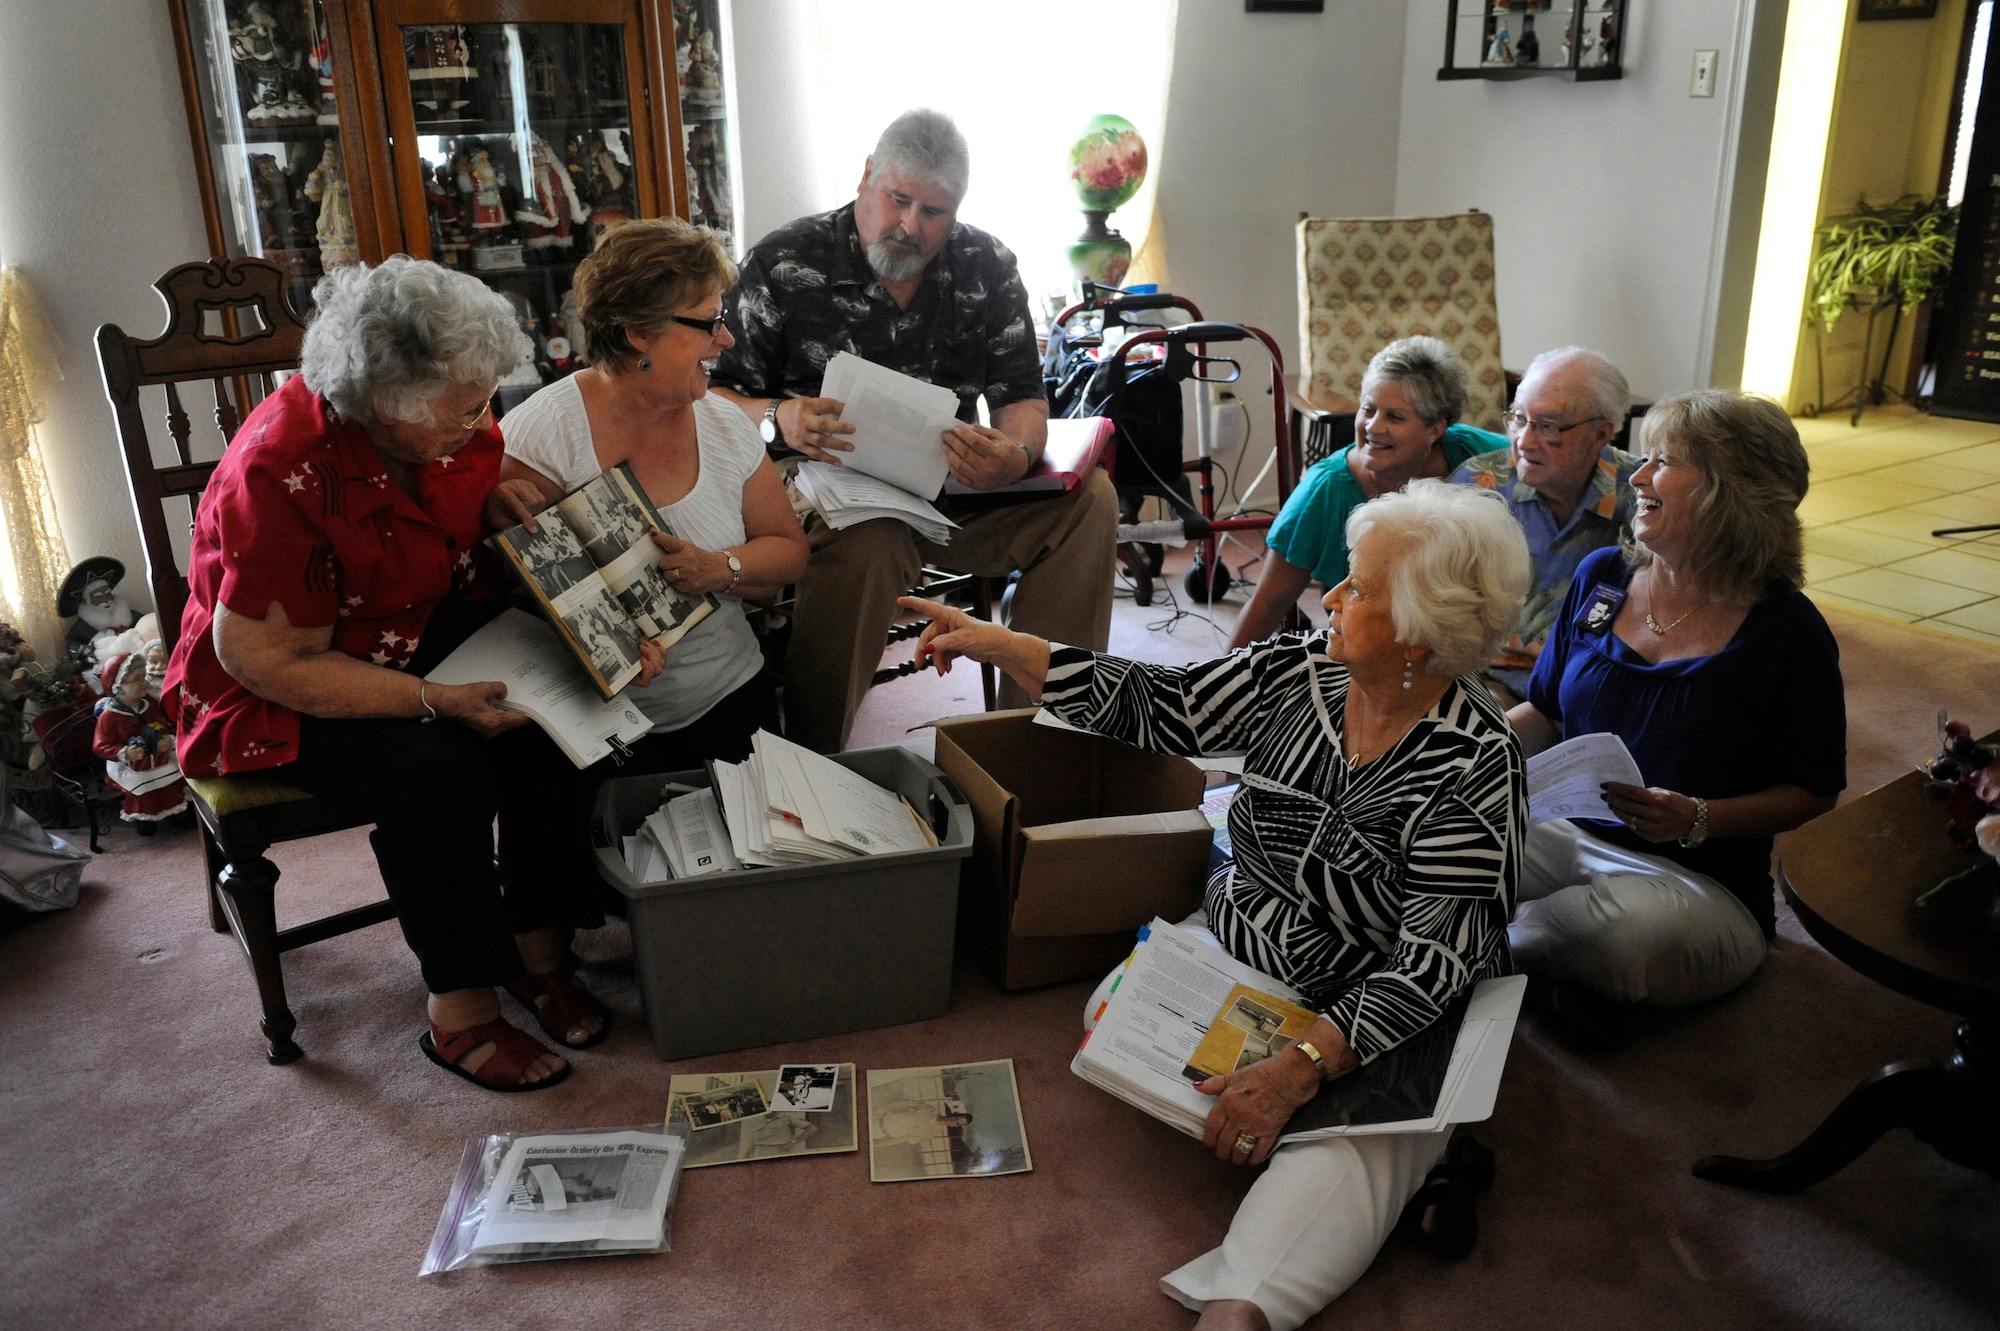 Relatives laugh as Debra Morris, second from left, a niece of the late Master Sgt. James Calfee, shows a photo of her uncle from his high school yearbook in Houston, Texas, Aug. 22, 2012. Calfee, who was posthumously awarded the Silver Star Medal, was killed in action in Laos in 1968. (U.S. Air Force photo/Val Gempis)